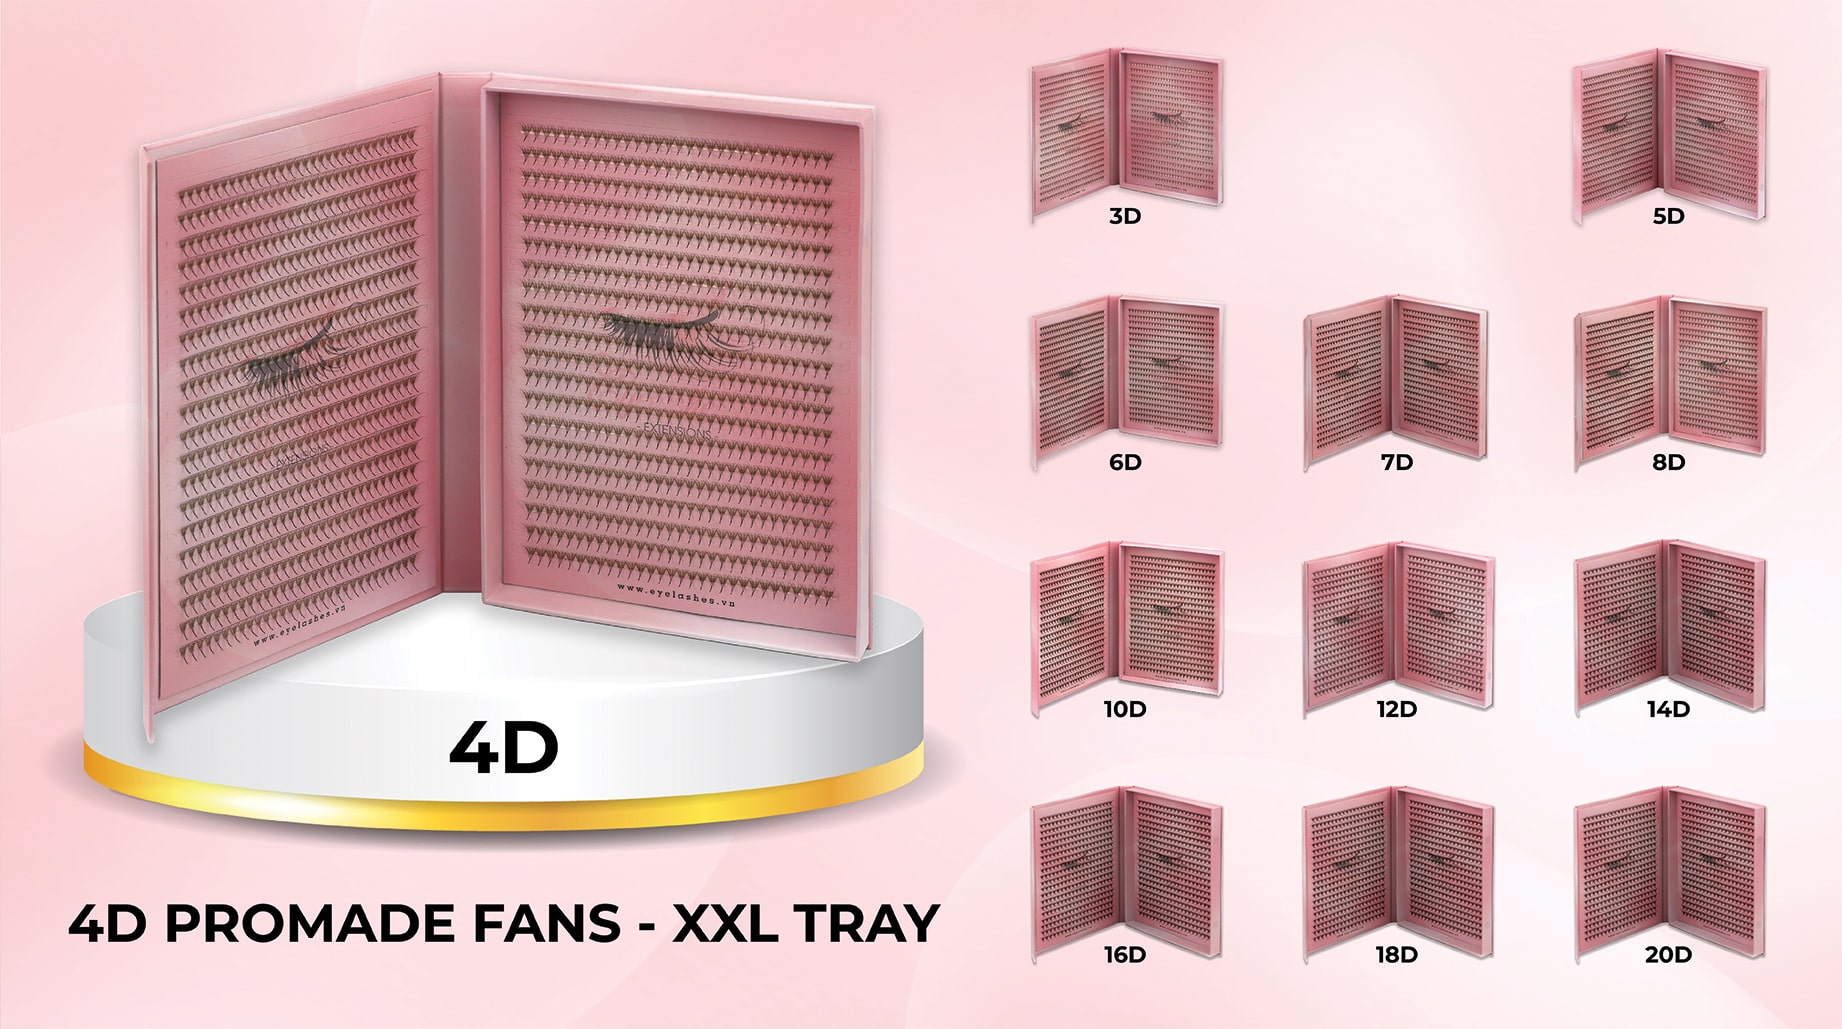 4D-promade-fan-XXL-Tray-wholesale-eyelash-supplier-VNLASHES